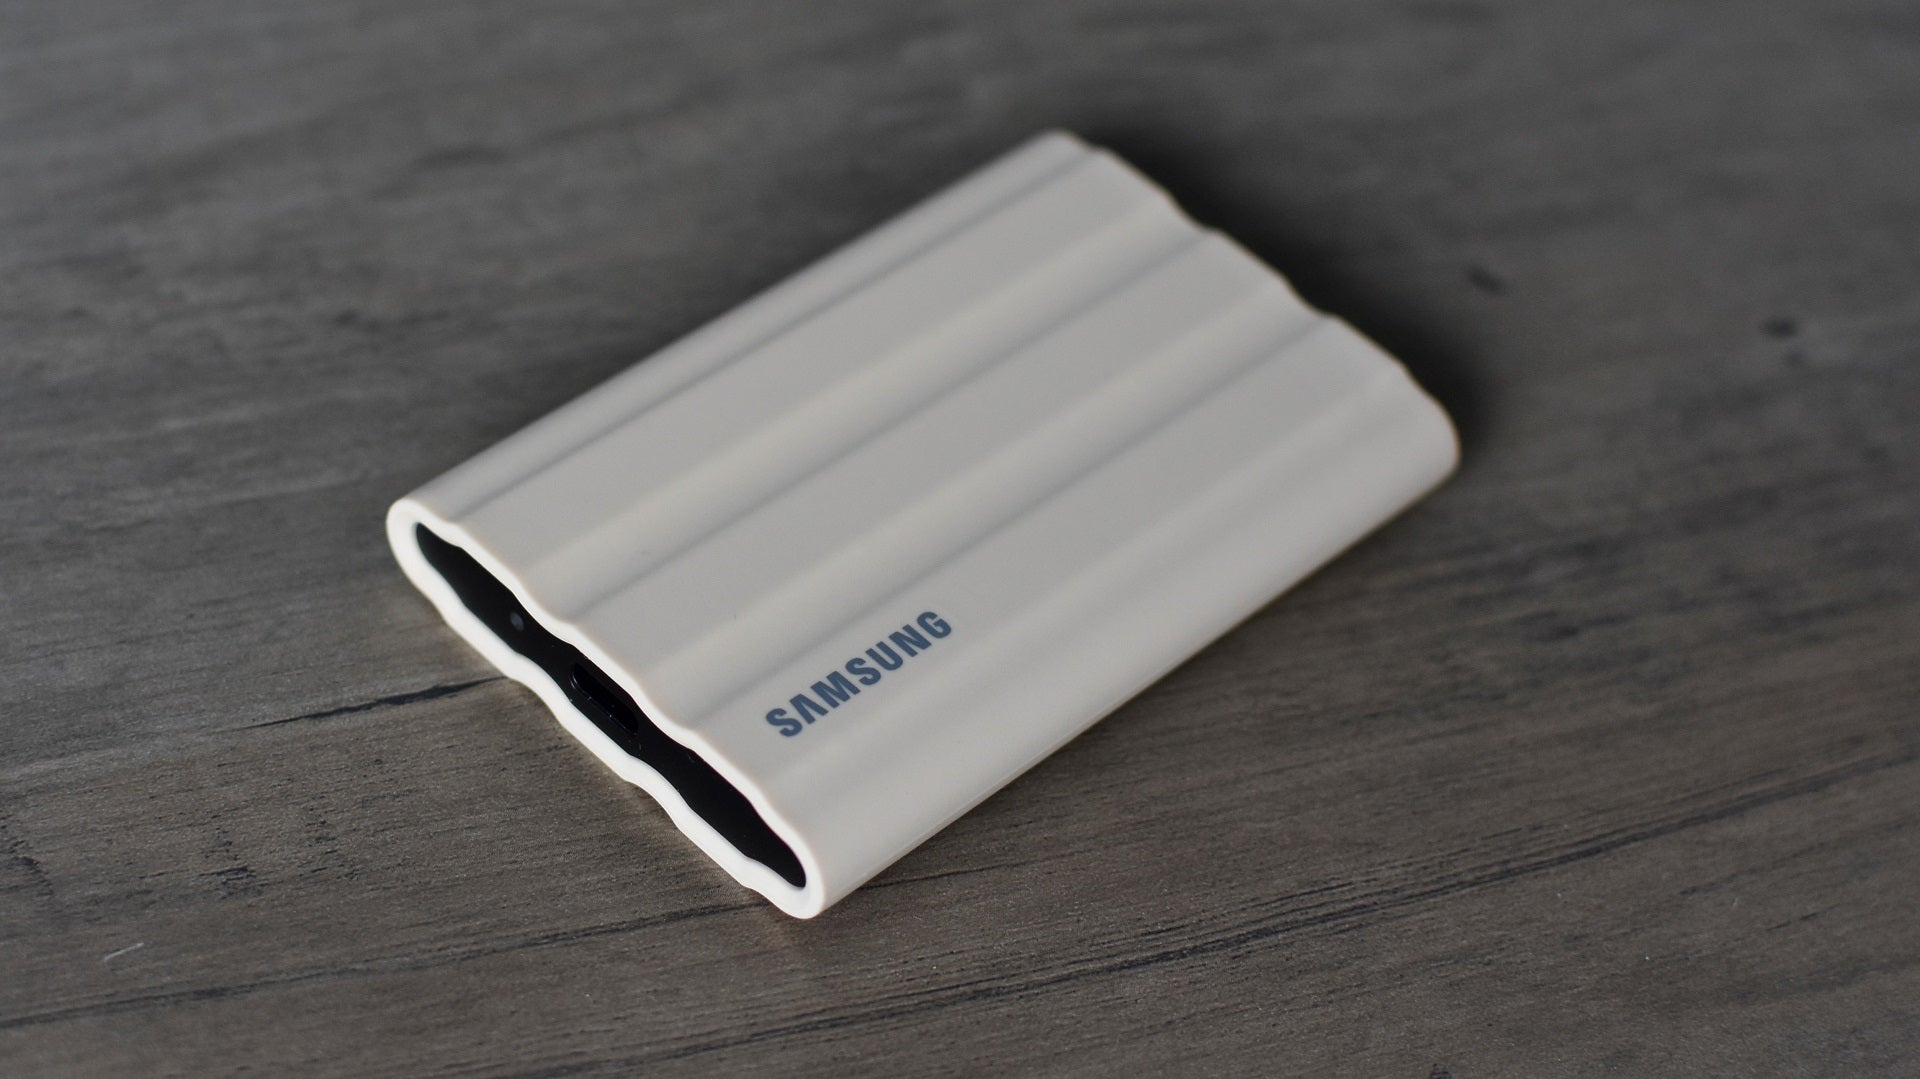 The Samsung T7 Shield portable SSD, without its detachable cable, on a table.